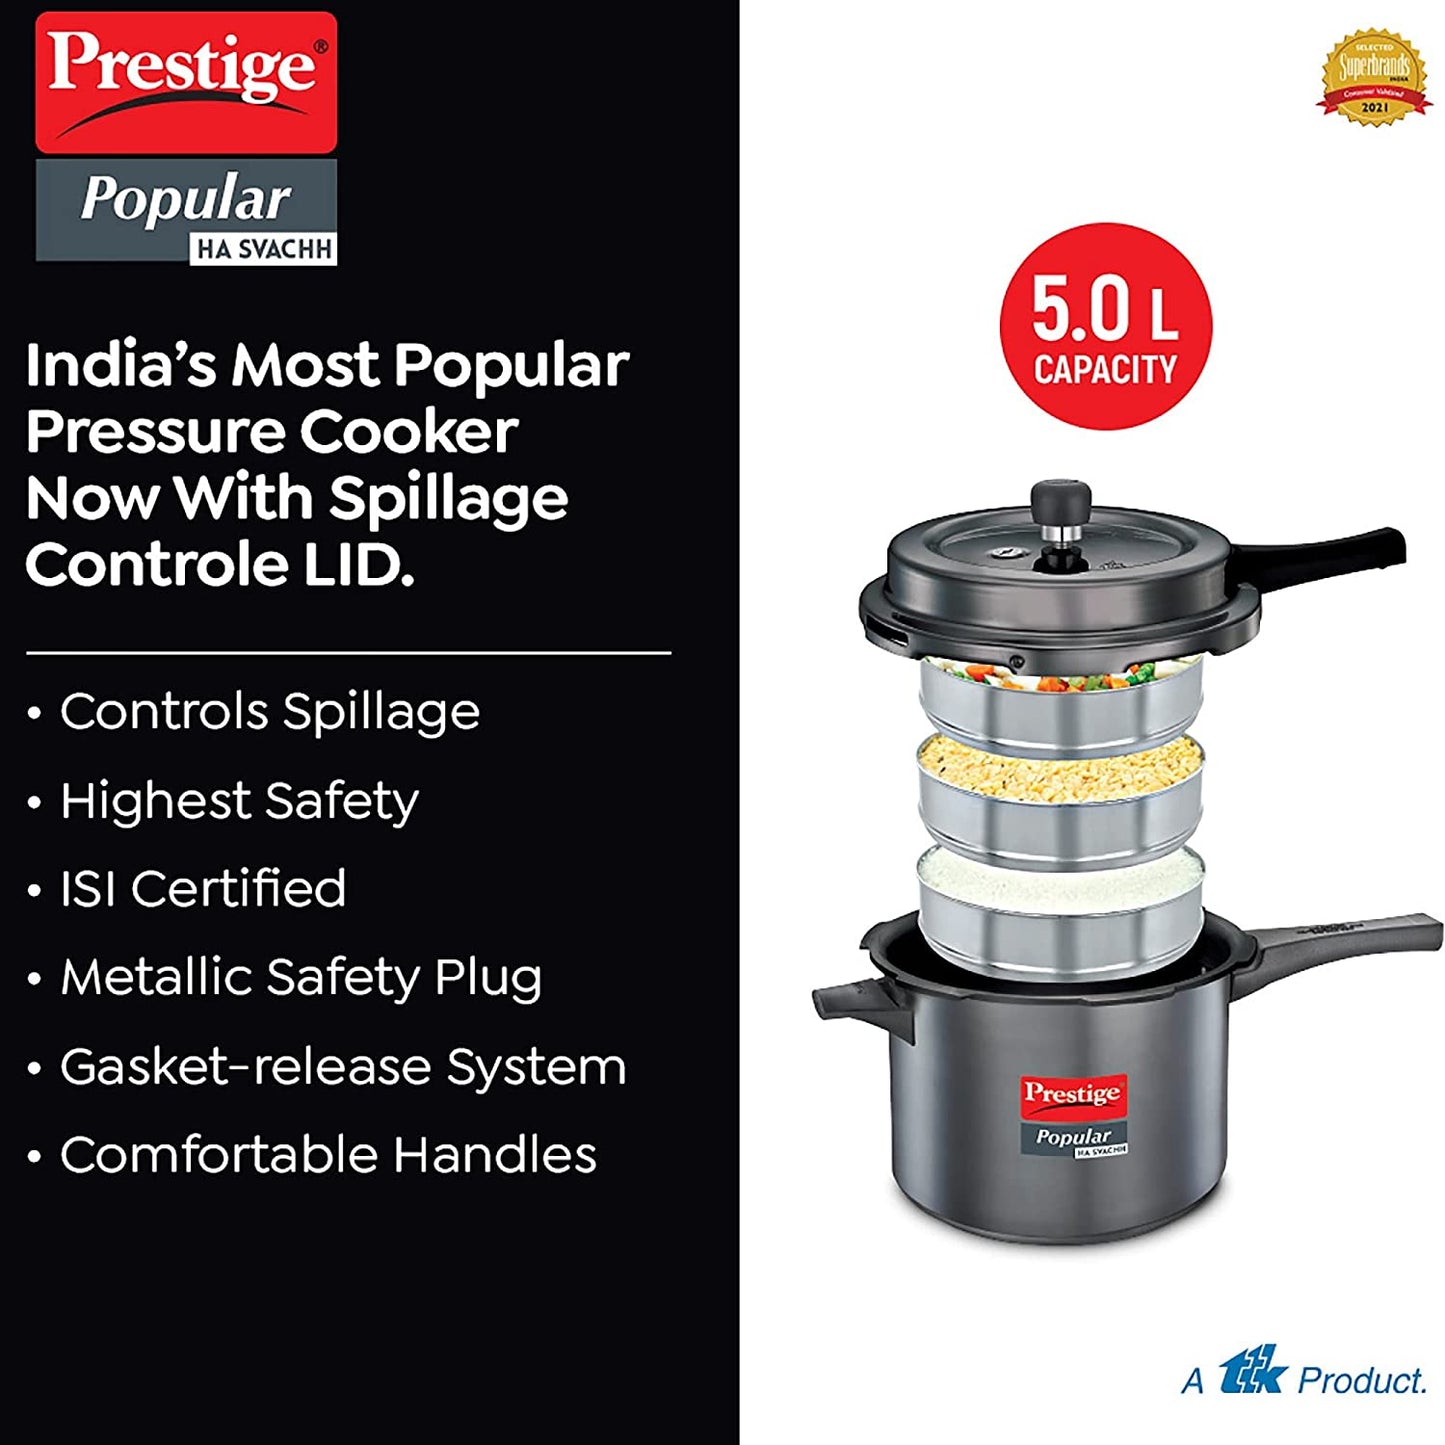 Prestige Popular Svachh Hard Anodised Stainless Steel Induction Base Outer Lid Pressure Cooker, 5 Litres